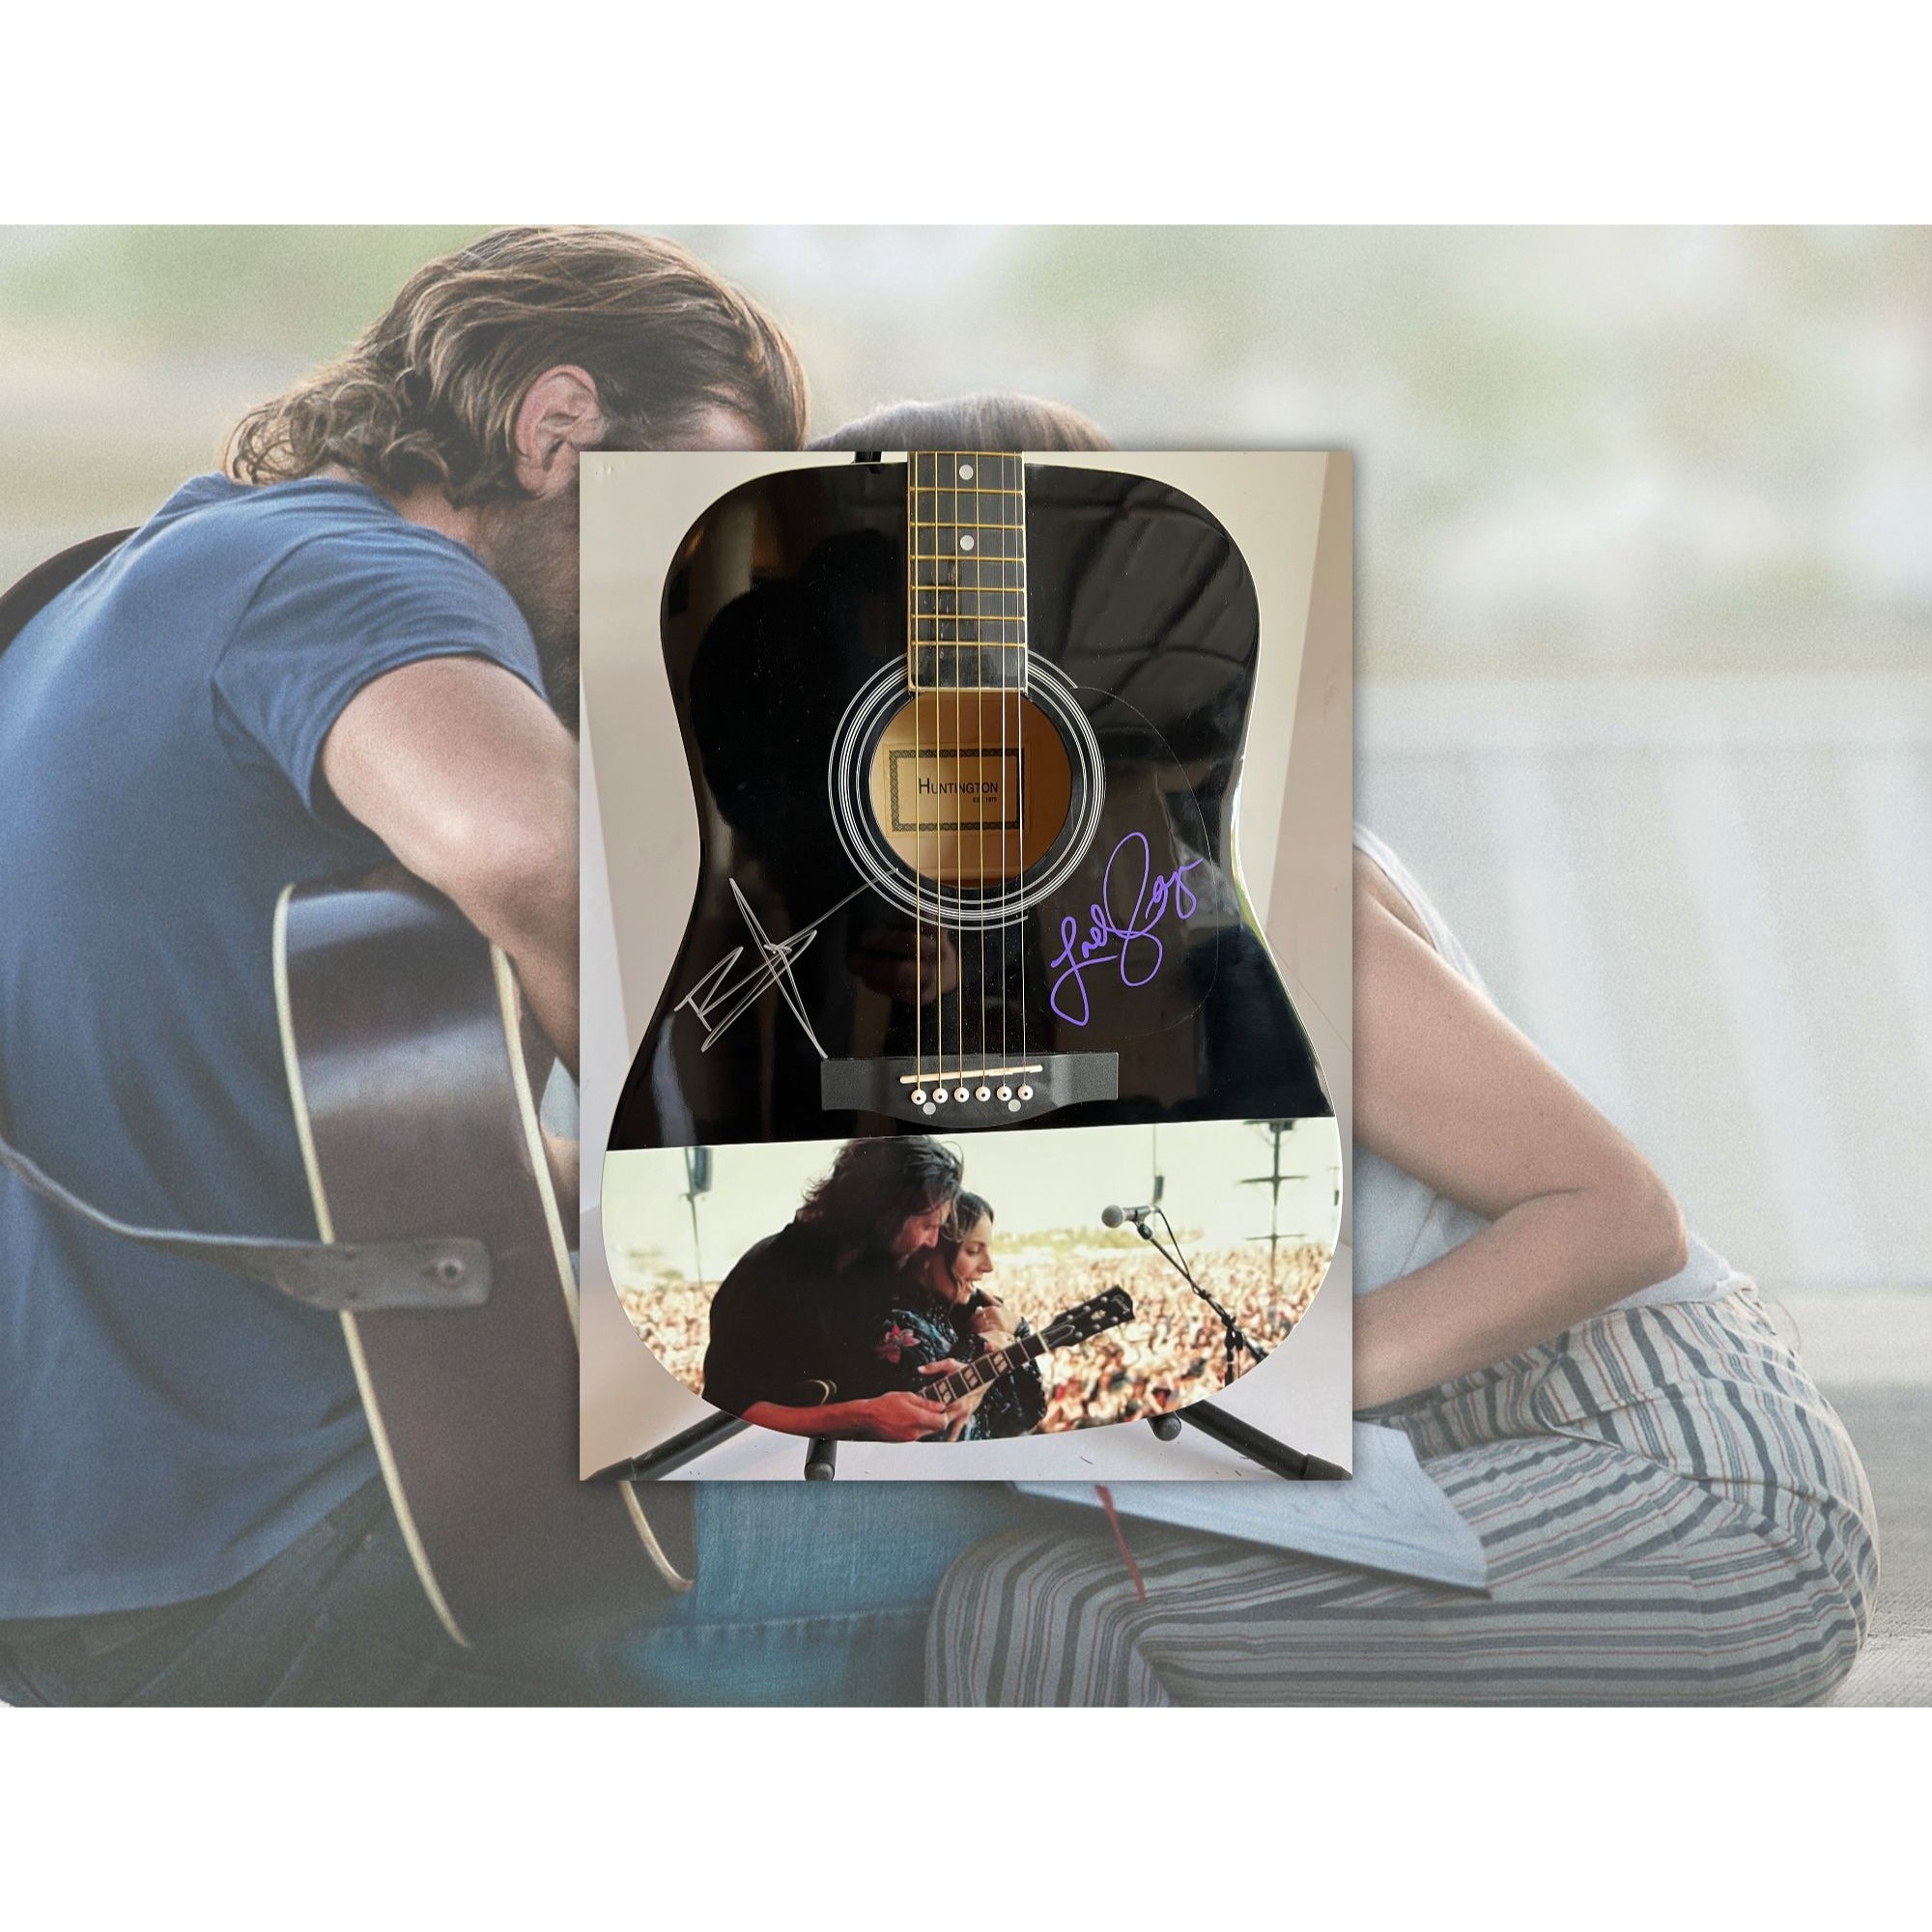 Bradley Cooper Lady Gaga "A Star Is Born" 39" one of a kind acoustic guitar signed with proof